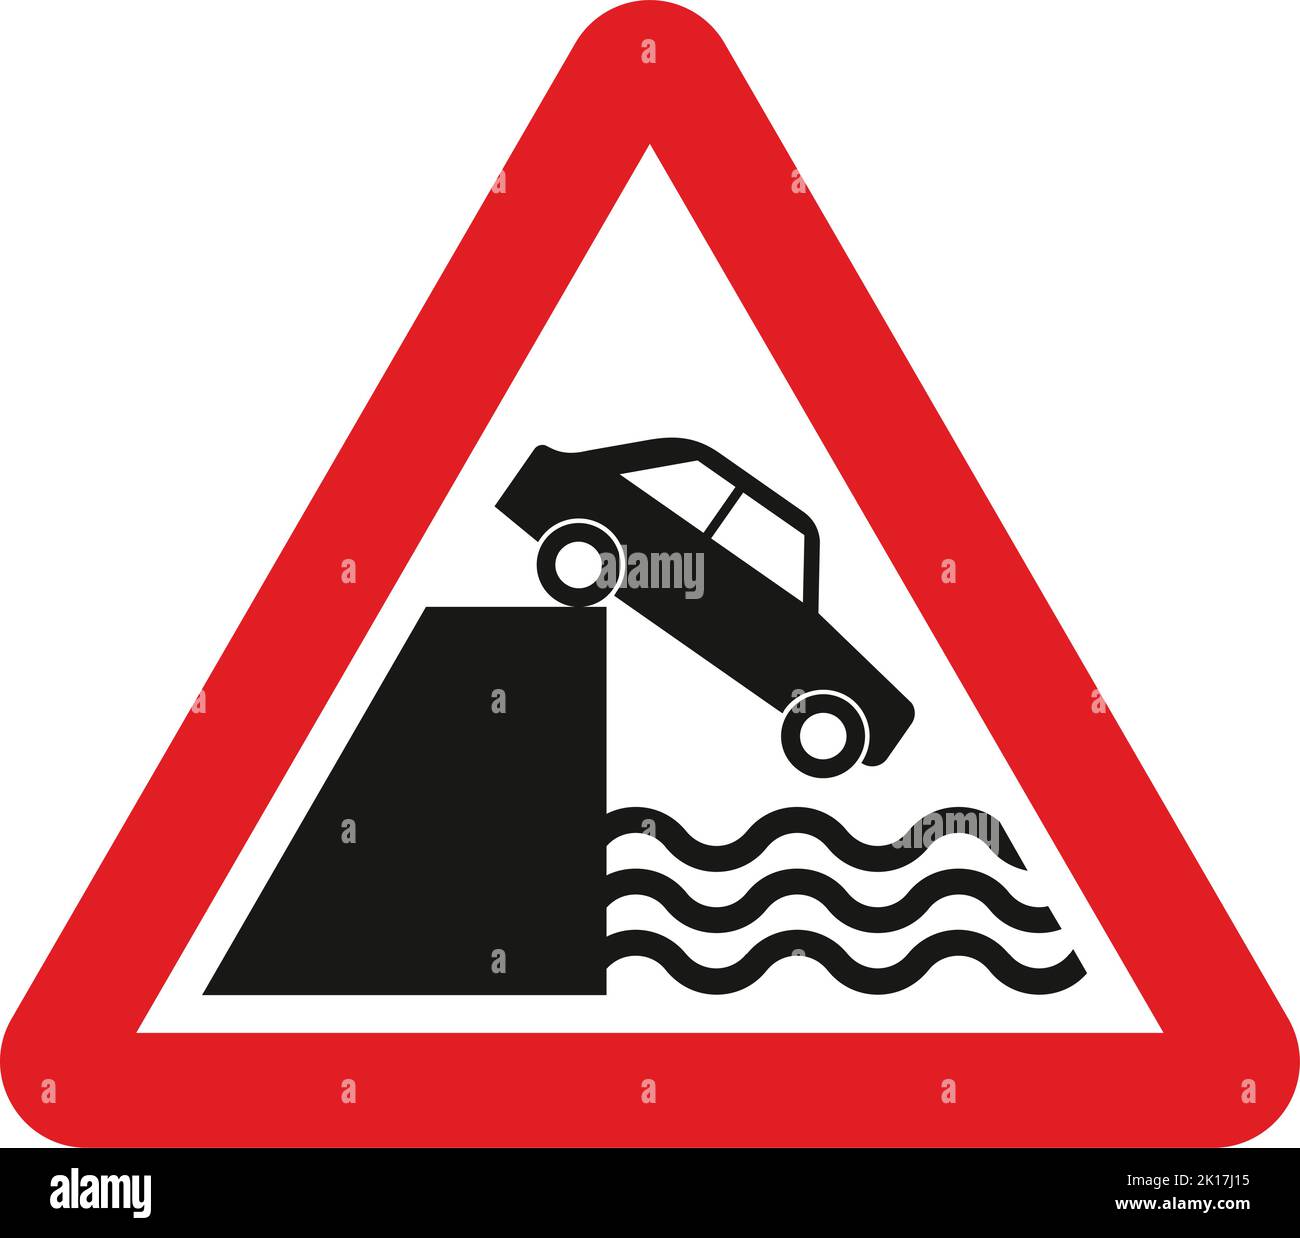 Quayside or river bank, The Highway Code Traffic Sign, Signs giving orders, Signs with red circles are mostly prohibitive. Plates below signs qualify Stock Vector